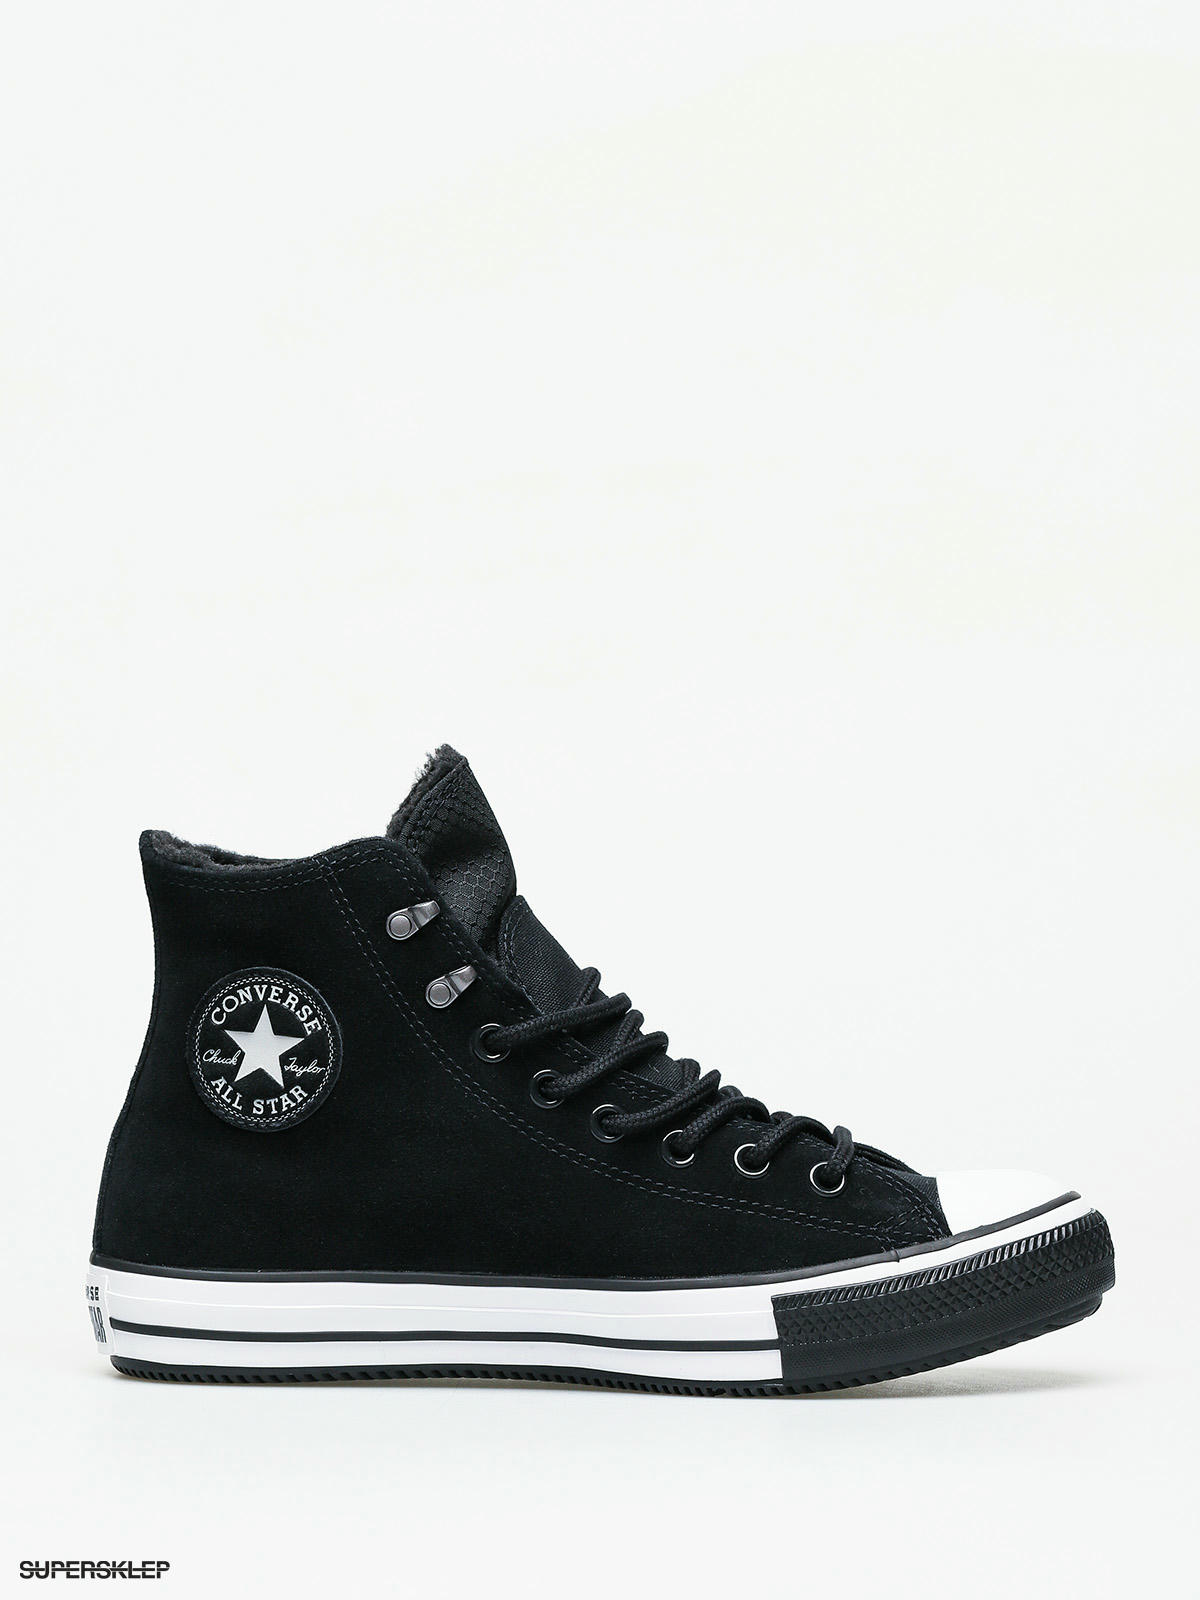 converse all star exclusive